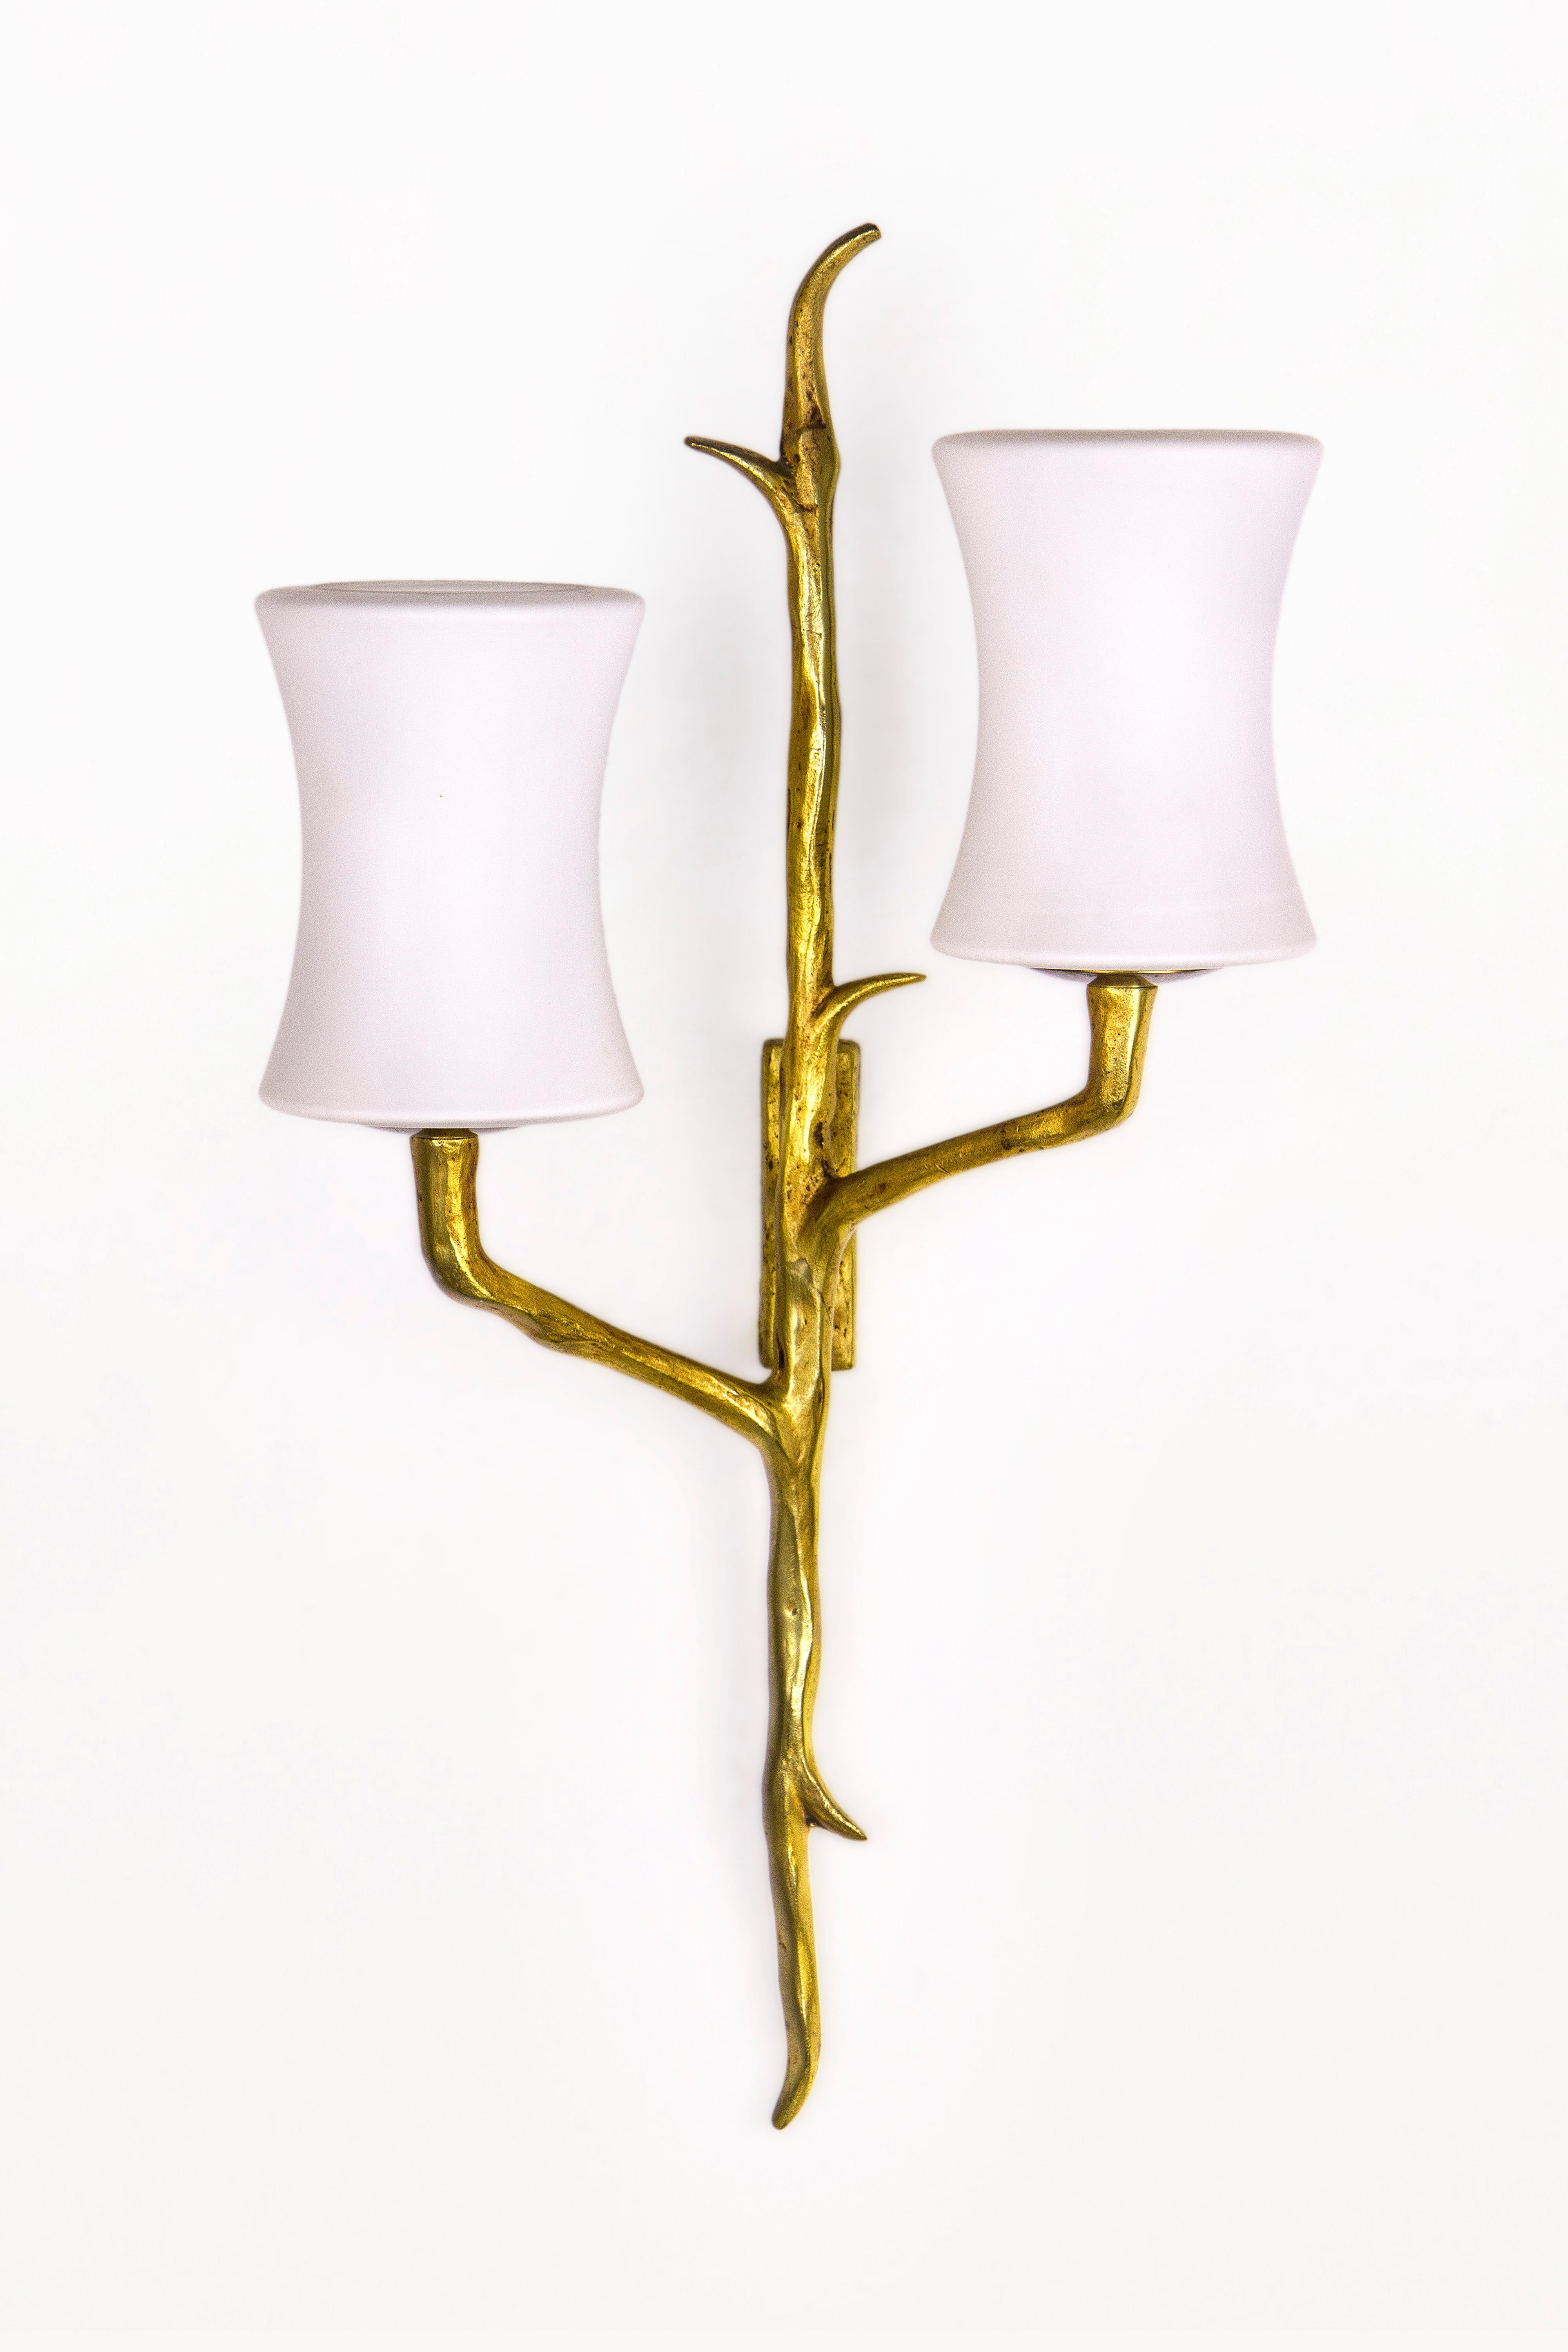 Pair of Maison Arlus sconces,
Very interesting and sculptural model in the style of Felix Agostini.
Bronze and opaline glass,
circa 1960, France.
Very good vintage condition.
 